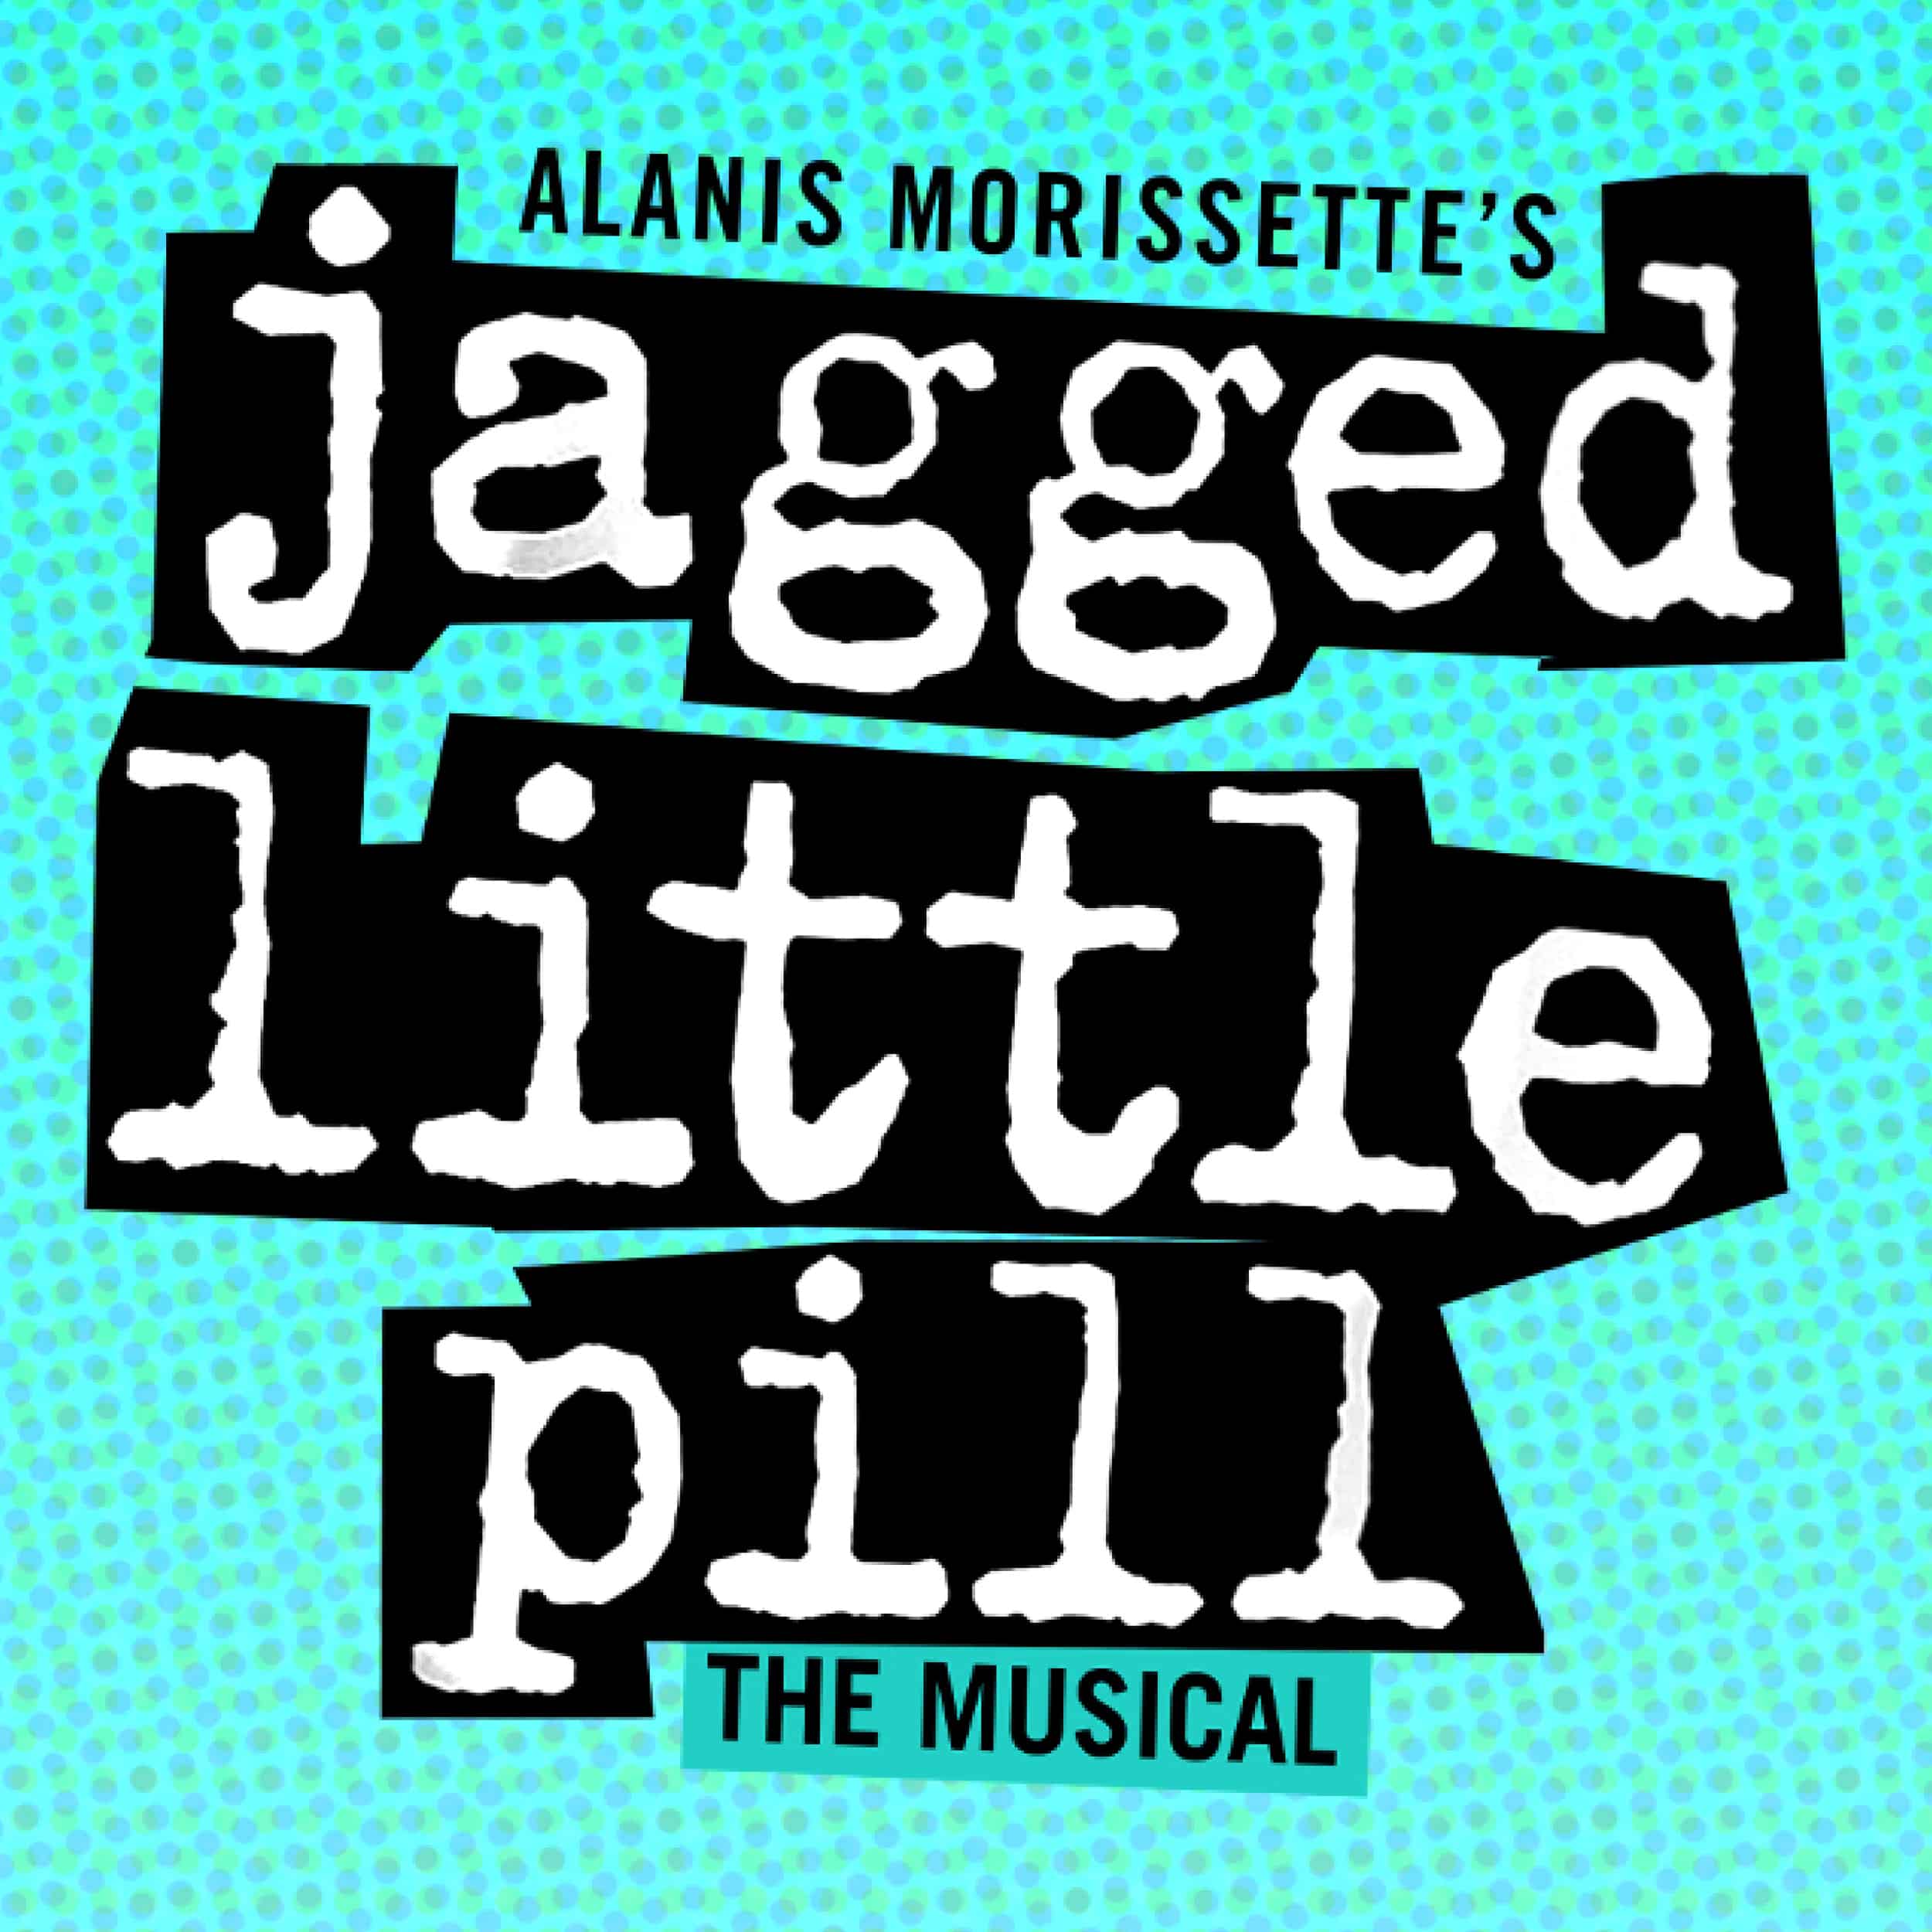 More Info for Jagged Little Pill